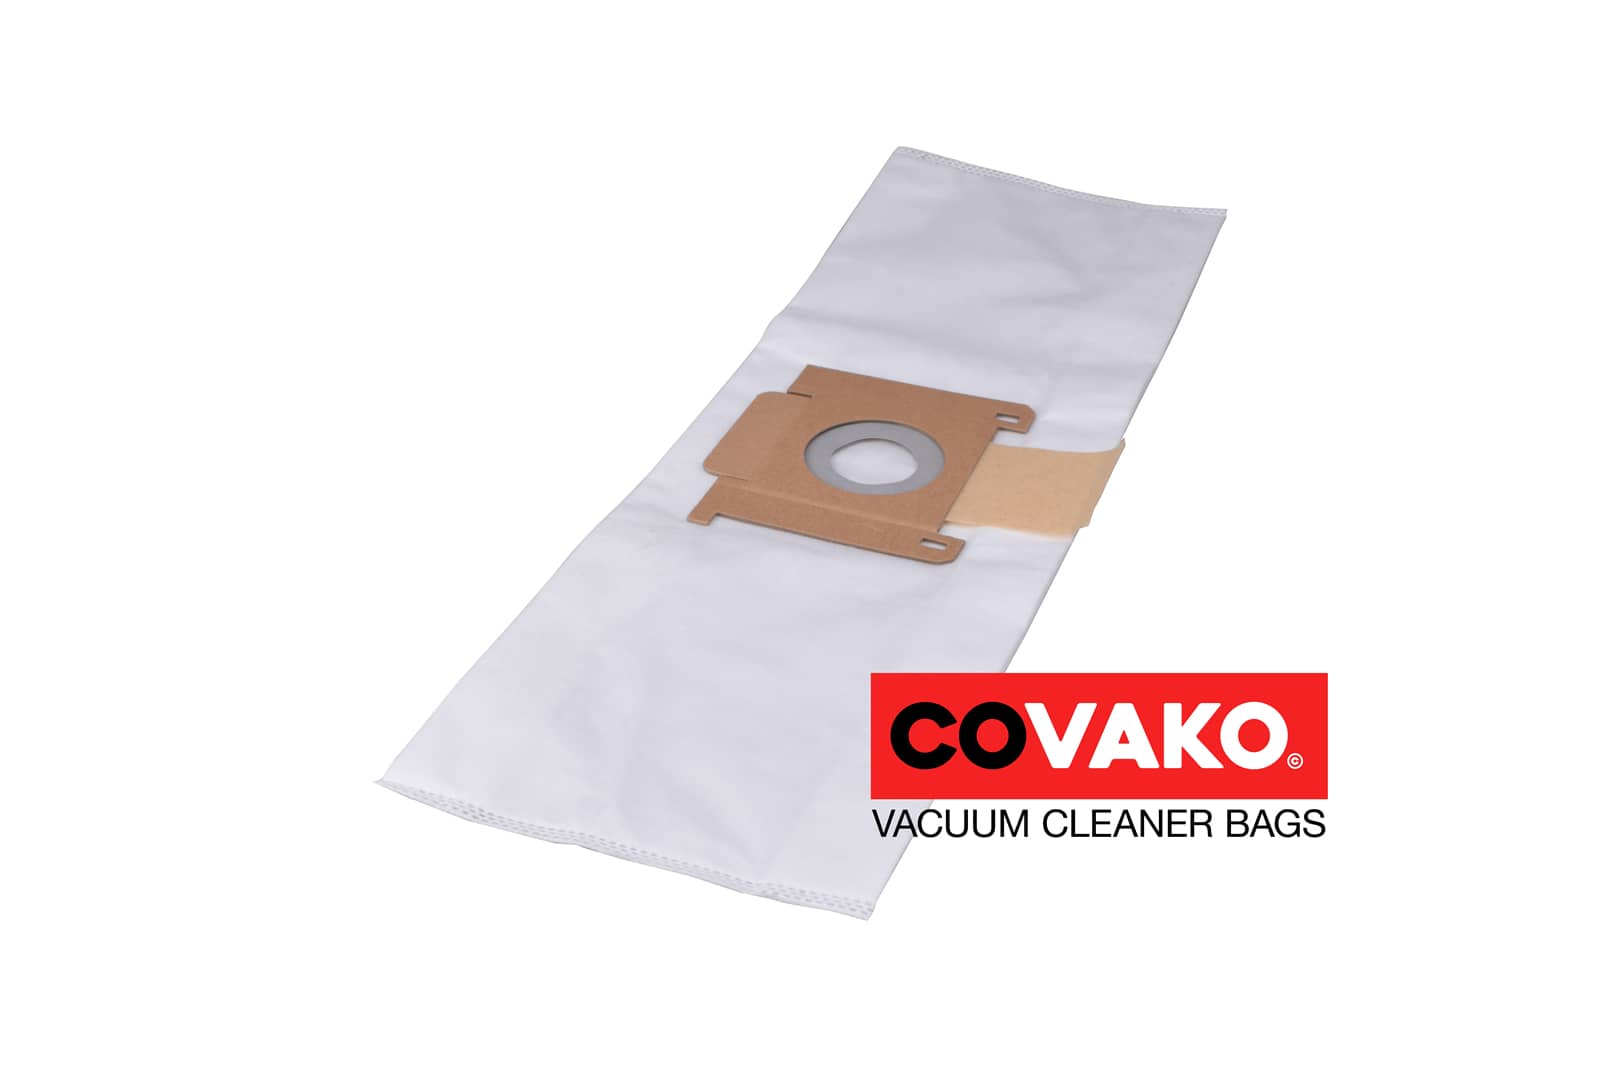 Ivac Hi-Filtration 6.0 / Synthesis - Ivac vacuum cleaner bags